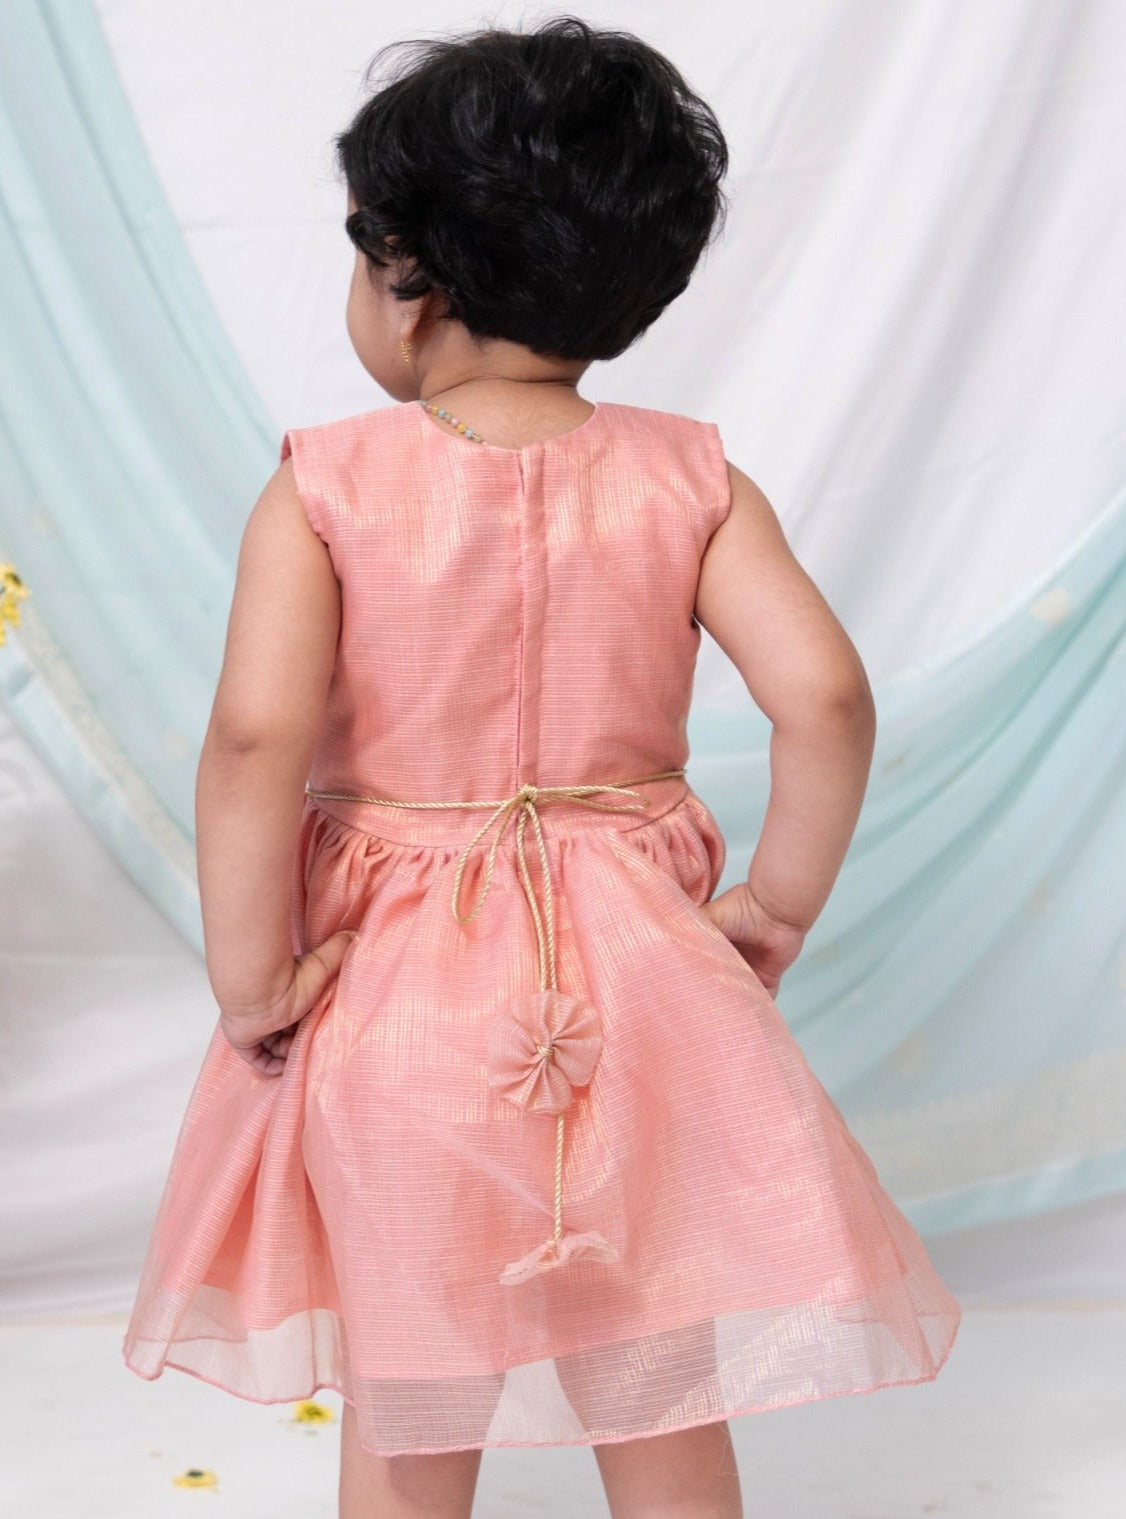 Pink tissue kotta fabric has a subtle shimmer all over yet maintains a soft touch. The statement bow is highlighted with golden chord and waist belt has cute flowers detailing at the ends. This feather light dress is perfect to pull of summer events with grace !